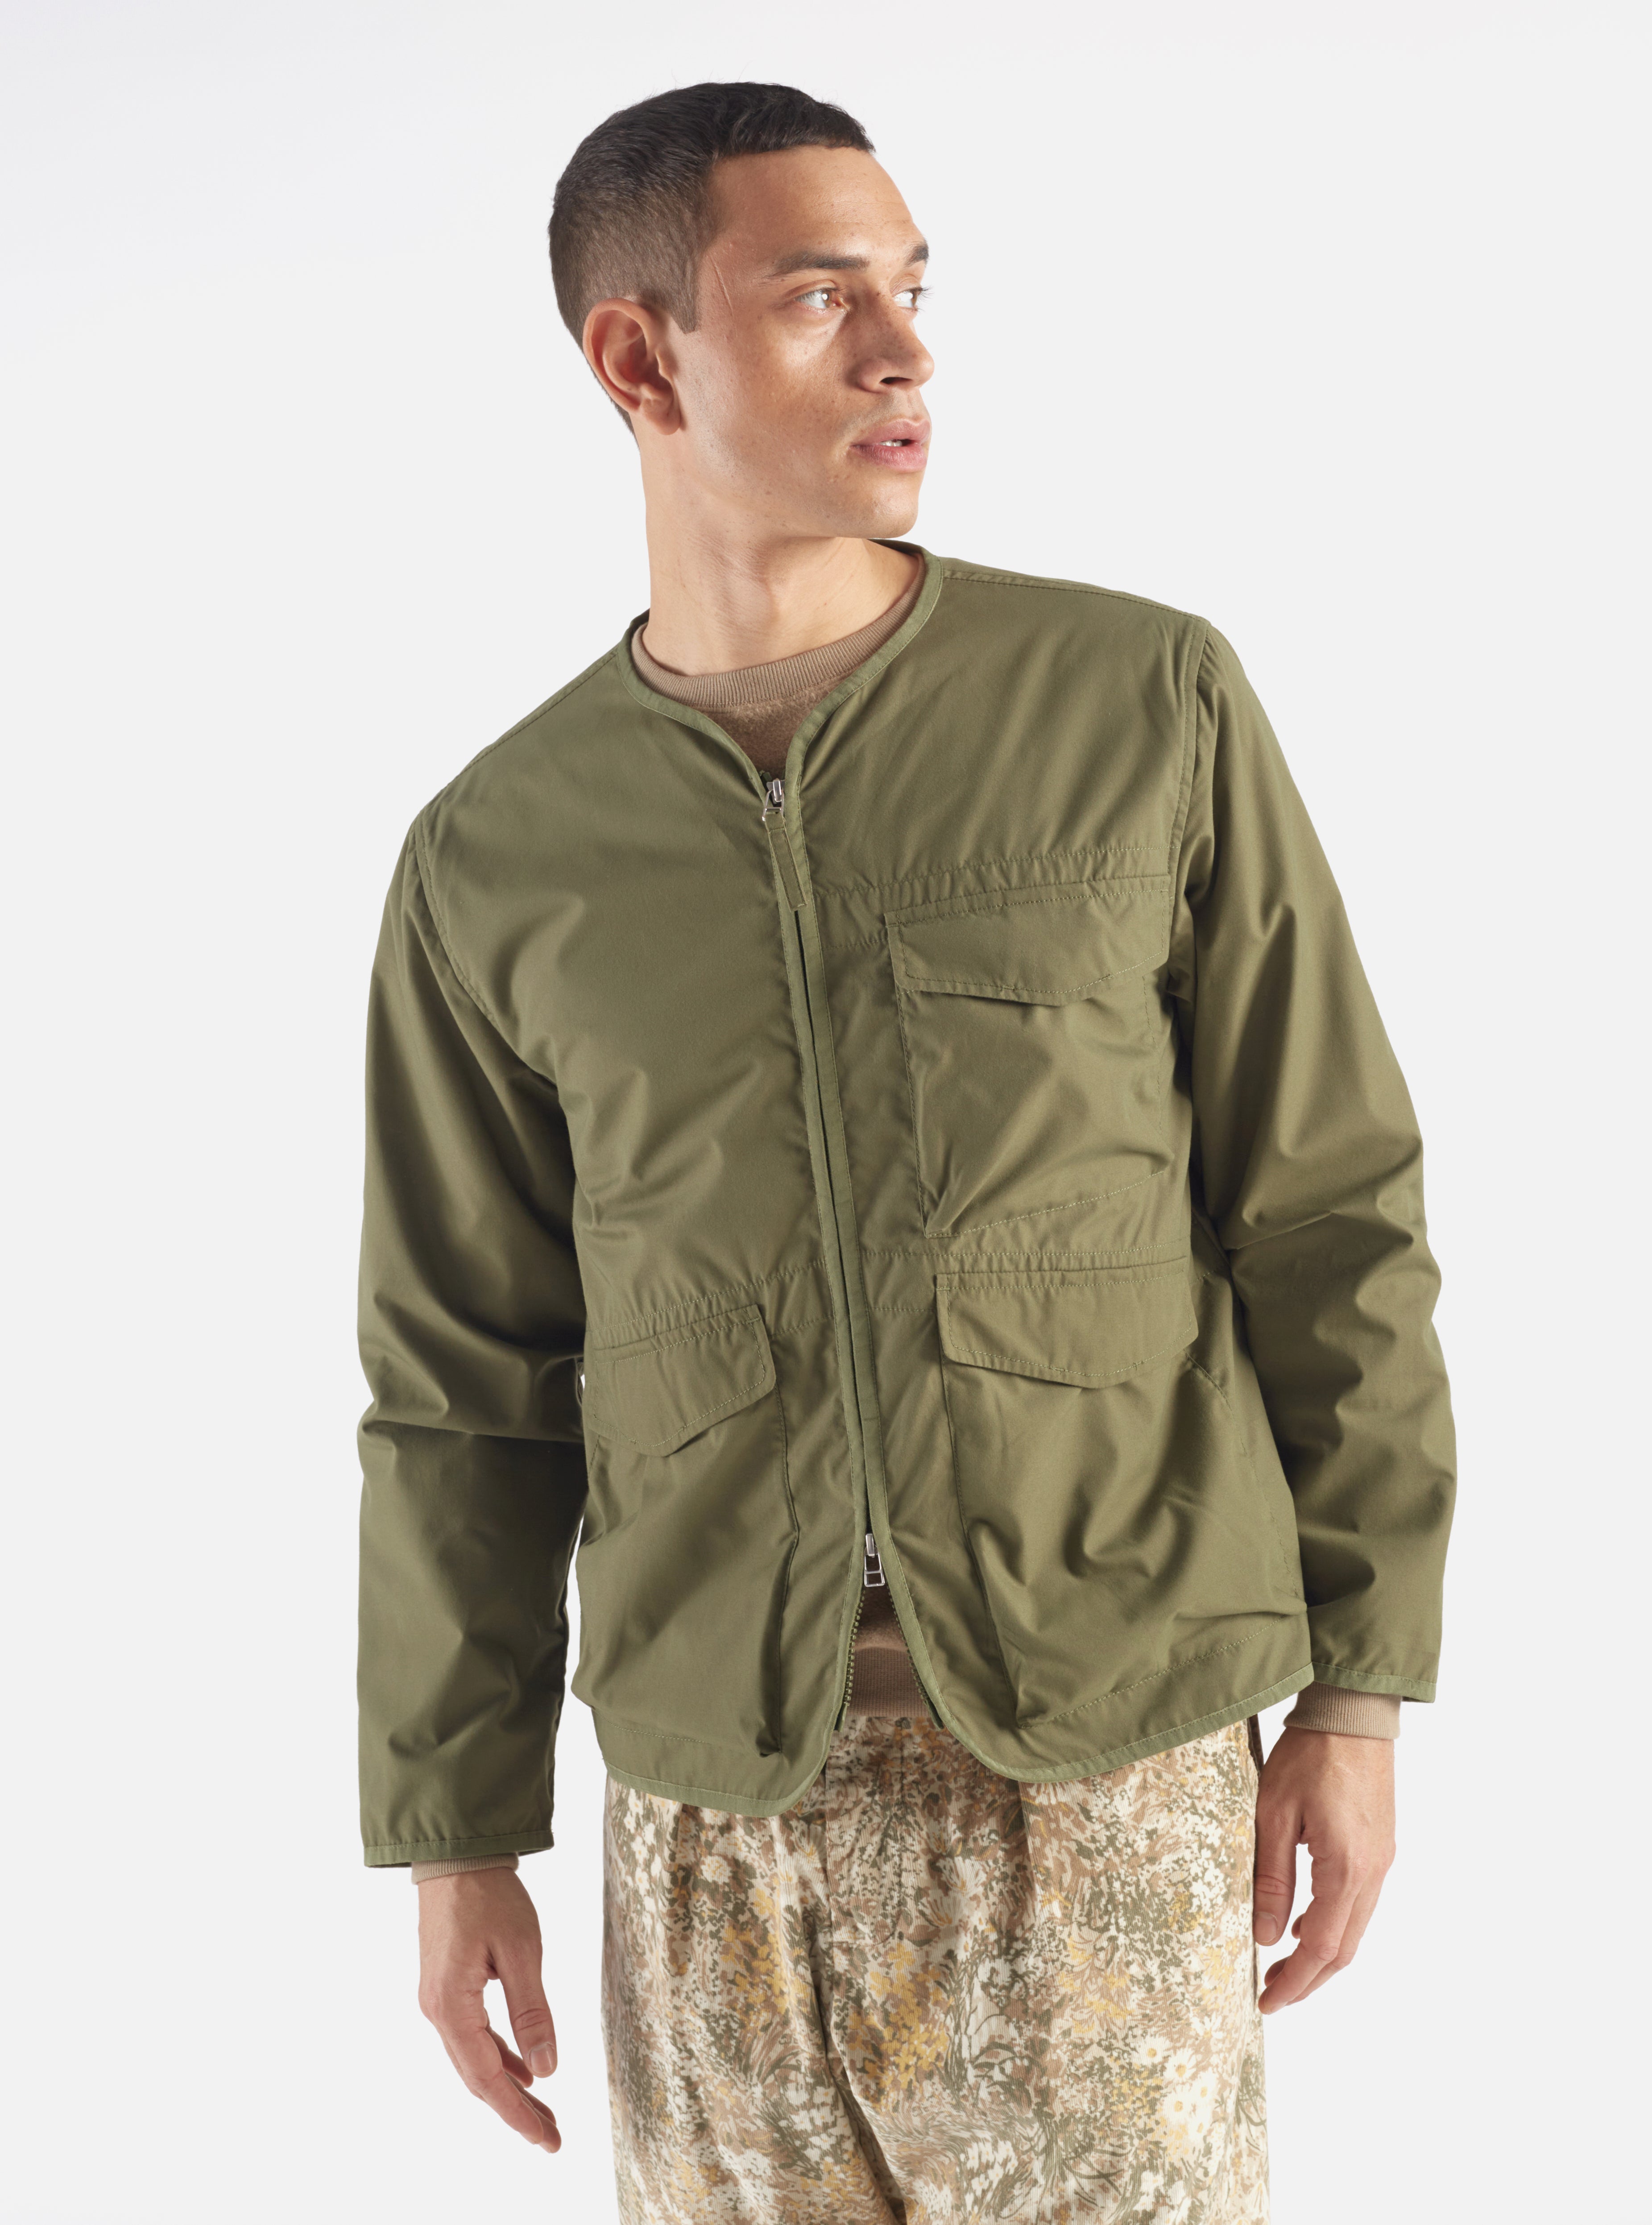 Olive & Oak Sweater Sleeve Cotton Military Jacket in Olive